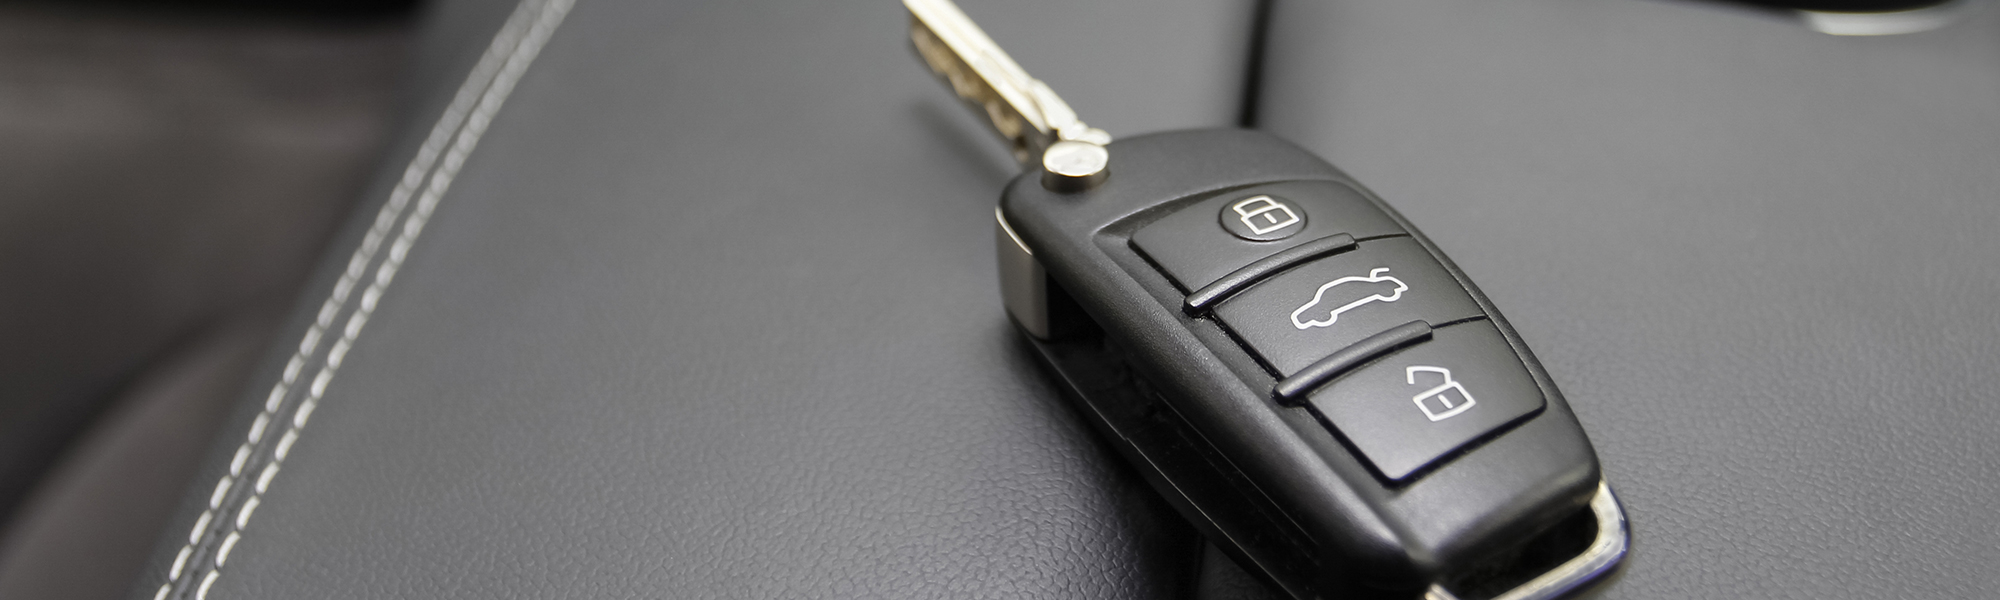 Fix Renault Car Key Problems Immediately by Calling Us